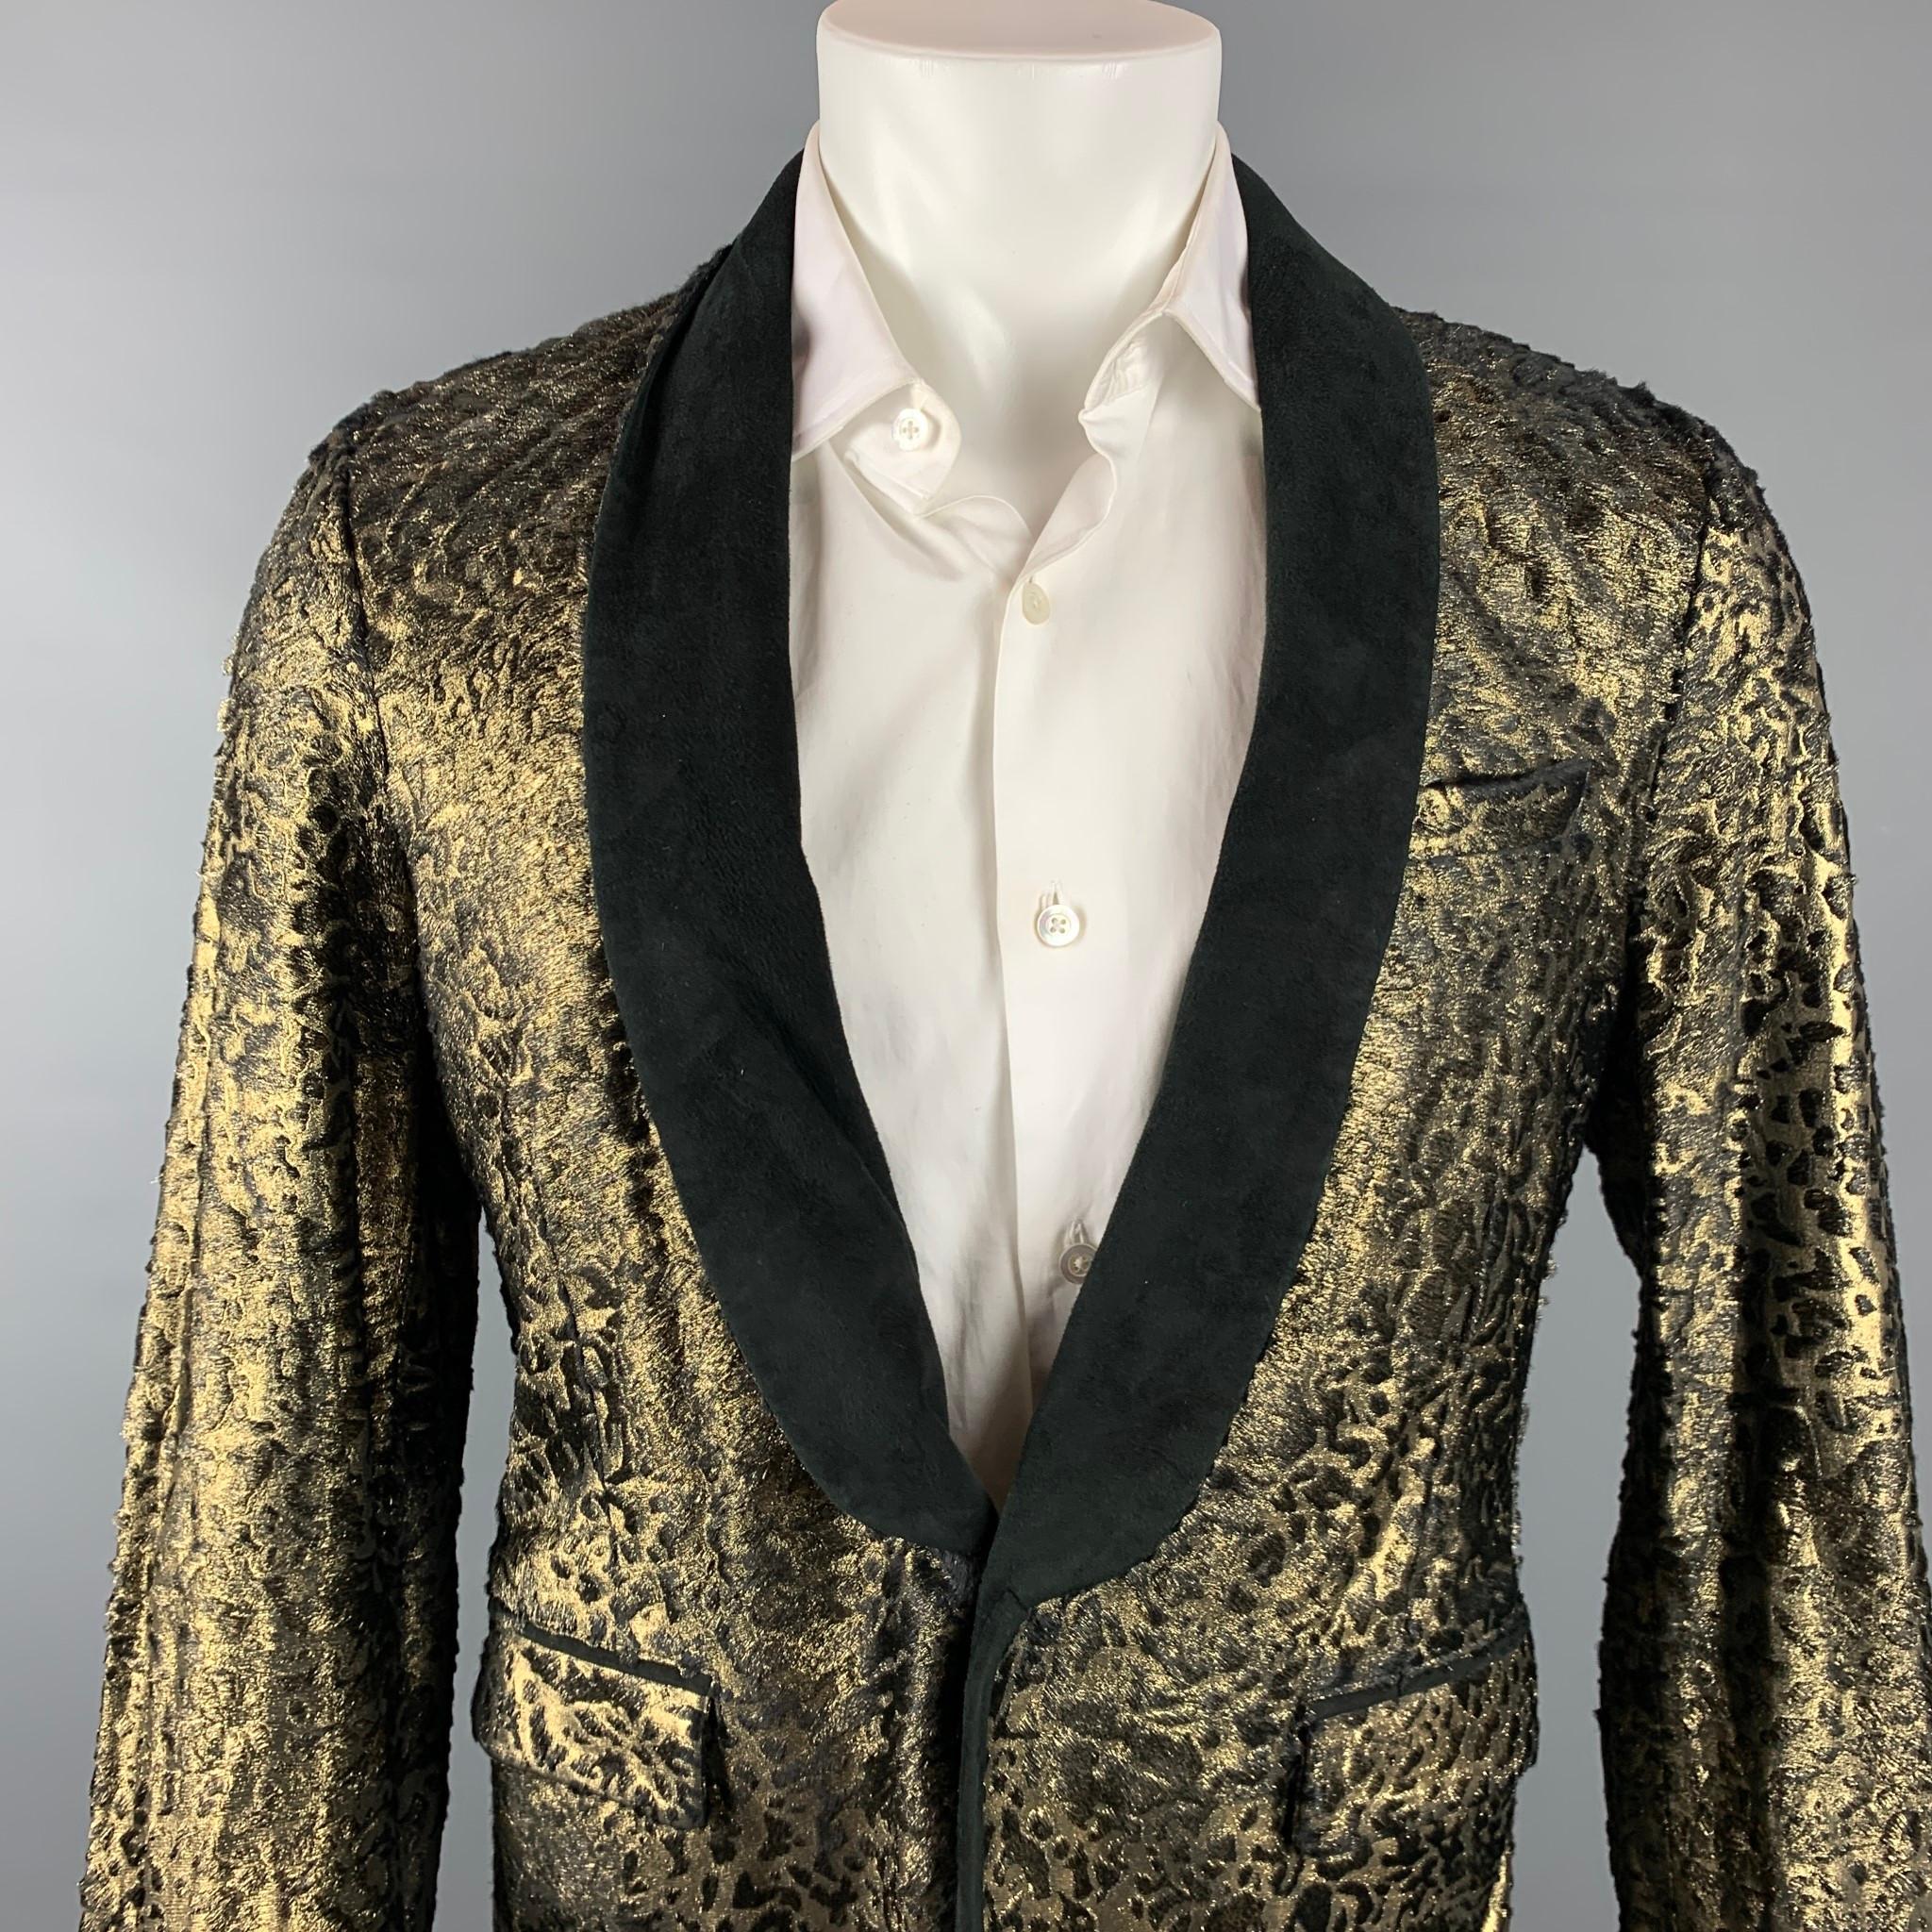 ROBERTO CAVALLI sport coat comes in a gold laser cut pony hair jacquard material with a full liner featuring a black suede lapel, flap pockets, and a single button closure. Made in Italy.

New With Tags.
Marked: IT 52
Original Retail Price: